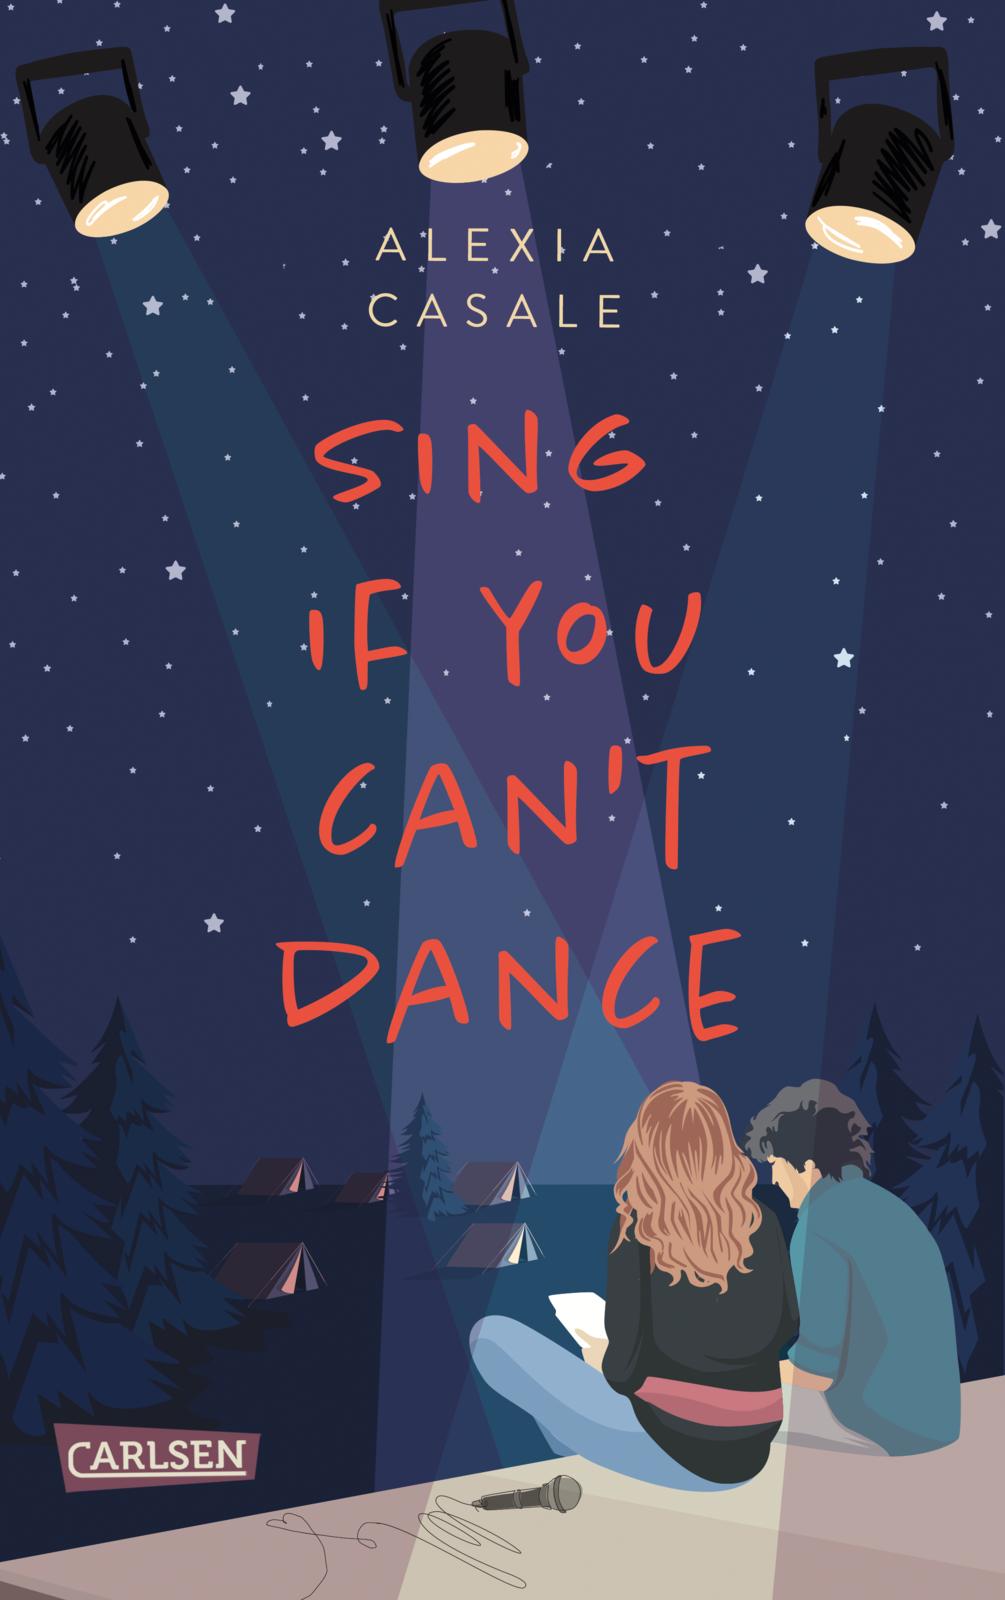 Alexia Casale - Sing If You Can't Dance